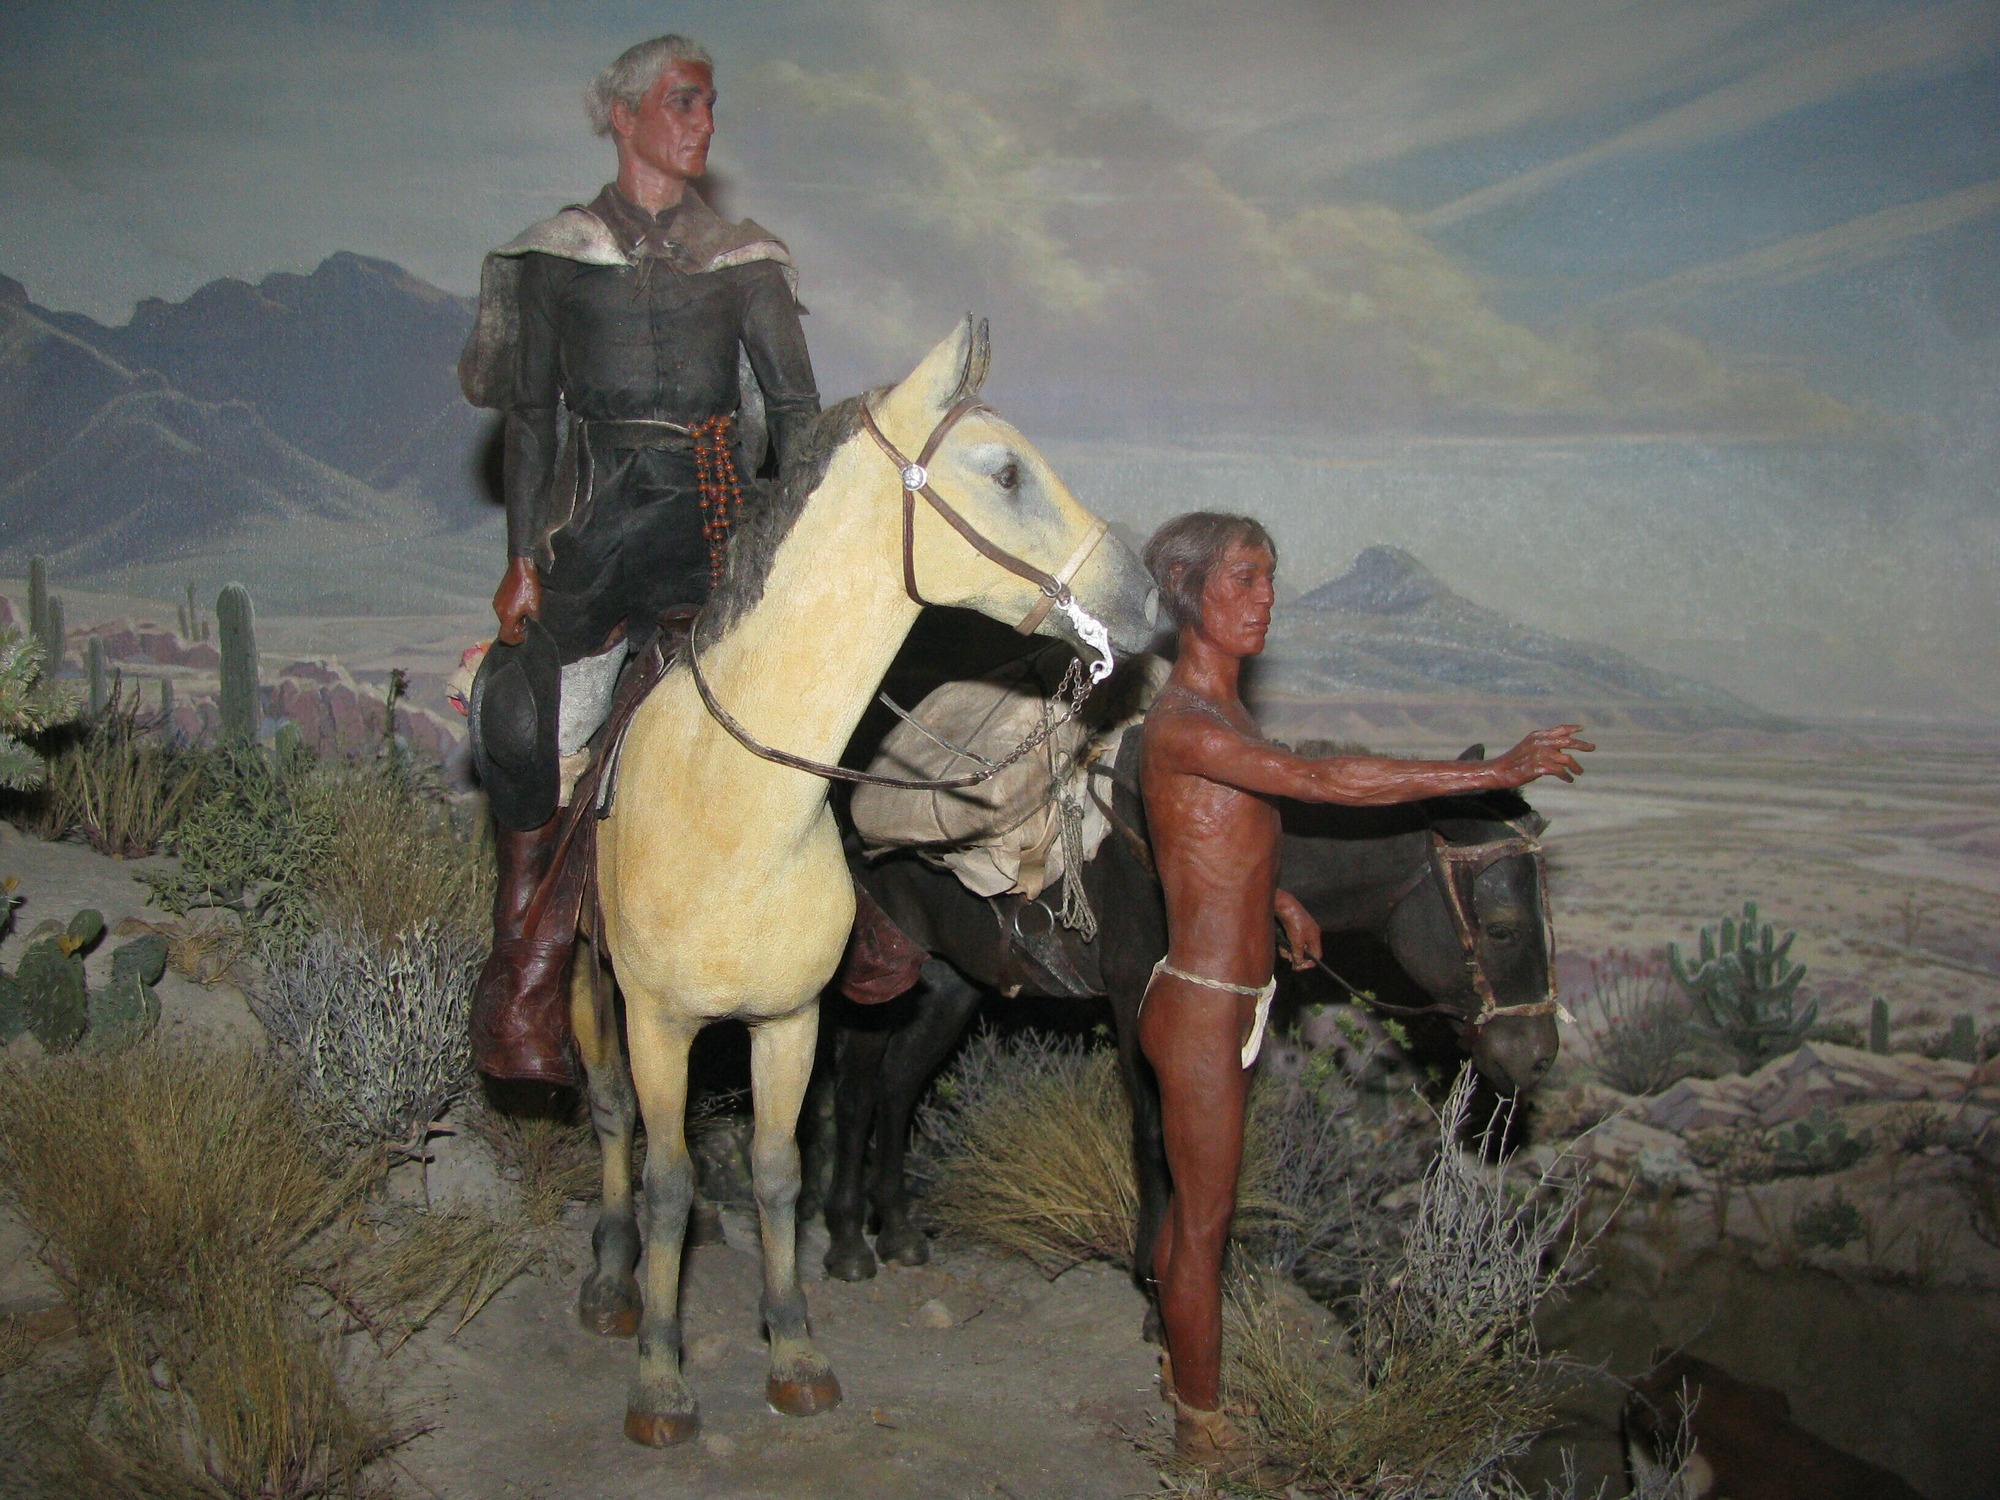 diorama depicting black-robed priest on horseback with O'odham guide in front of desert landscape